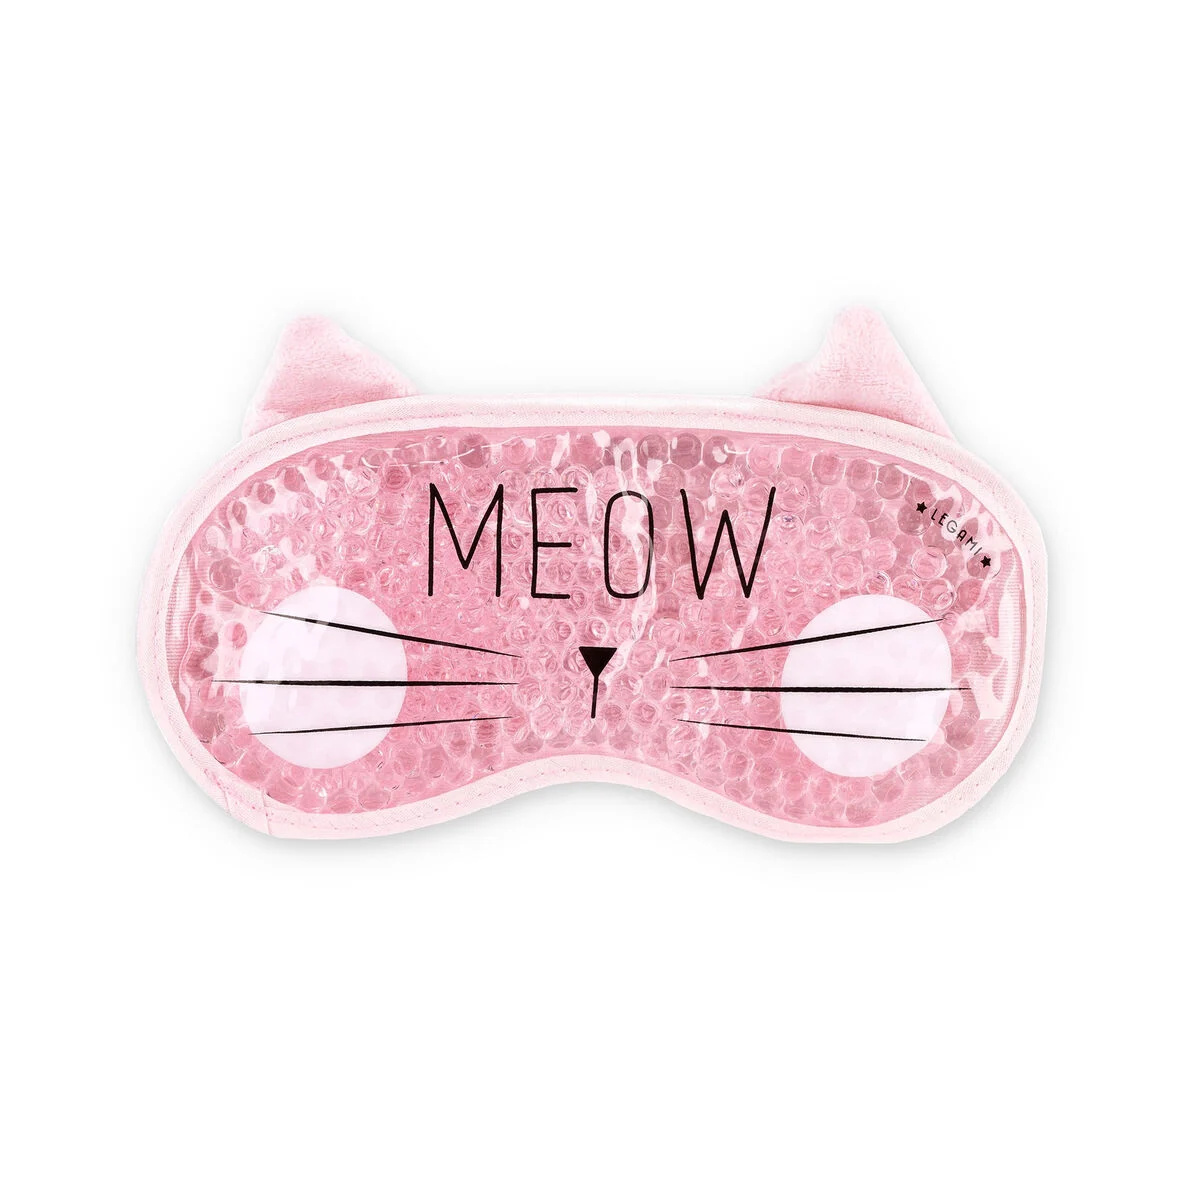 Legami Gel Eye Mask - Chill Out - Meow